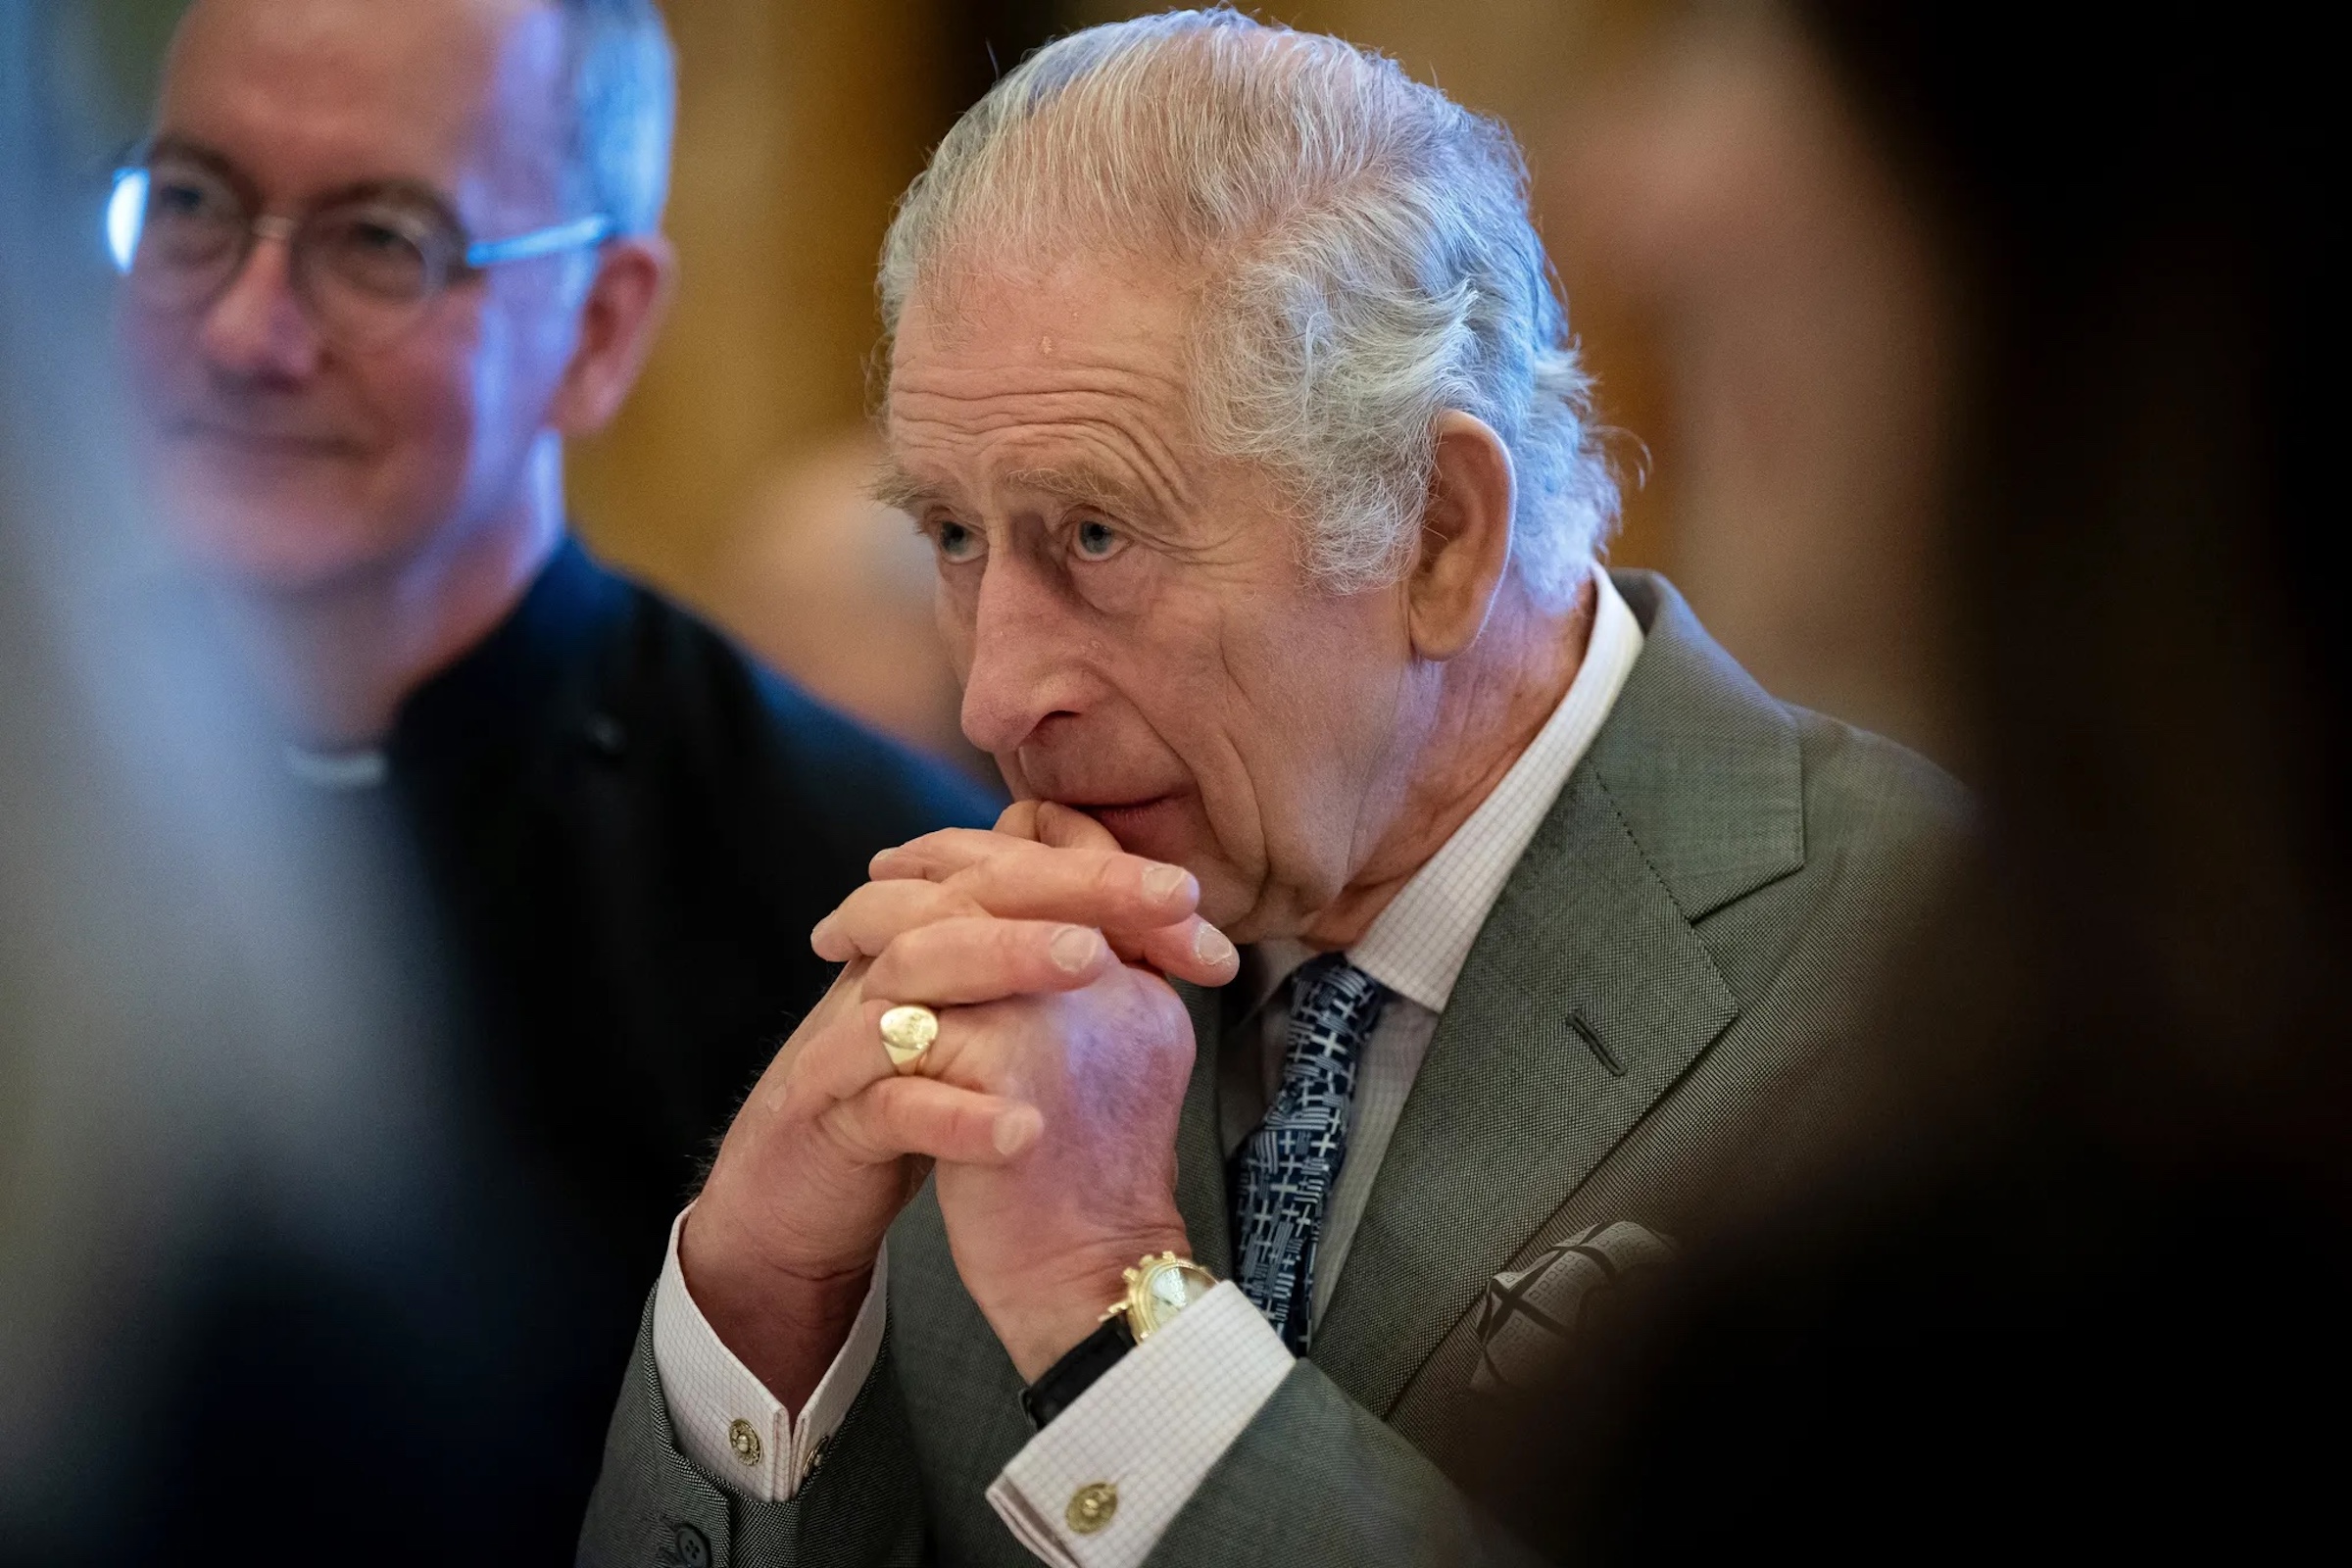 King Charles III candidly opens up about his cancer diagnosis, sparking an outpouring of support. How has Queen Camilla reacted?